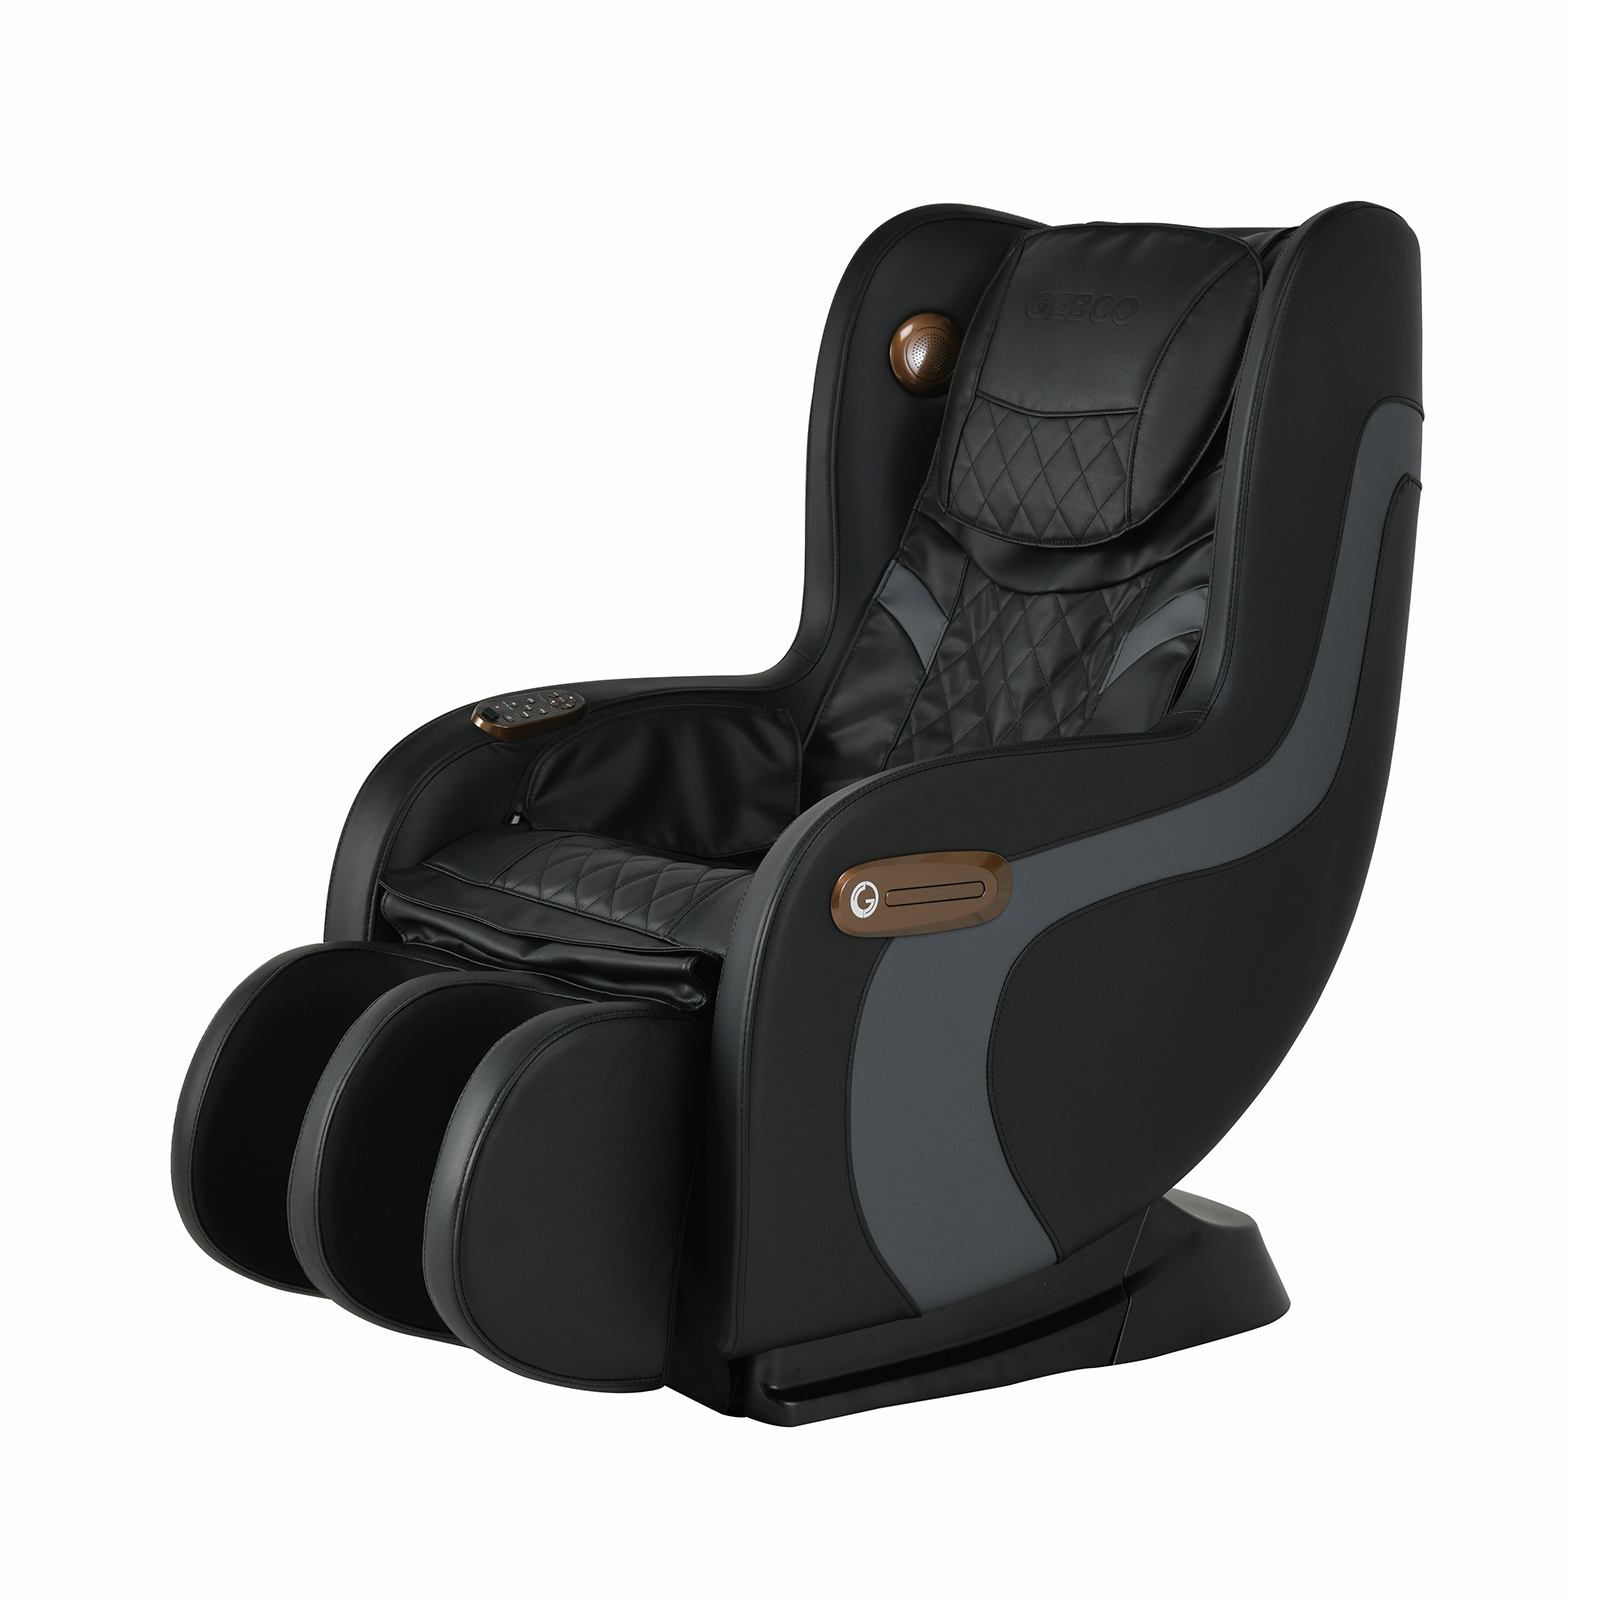 2022 GEBCO Comely SL-Track Lite Massage Chair (Brown)